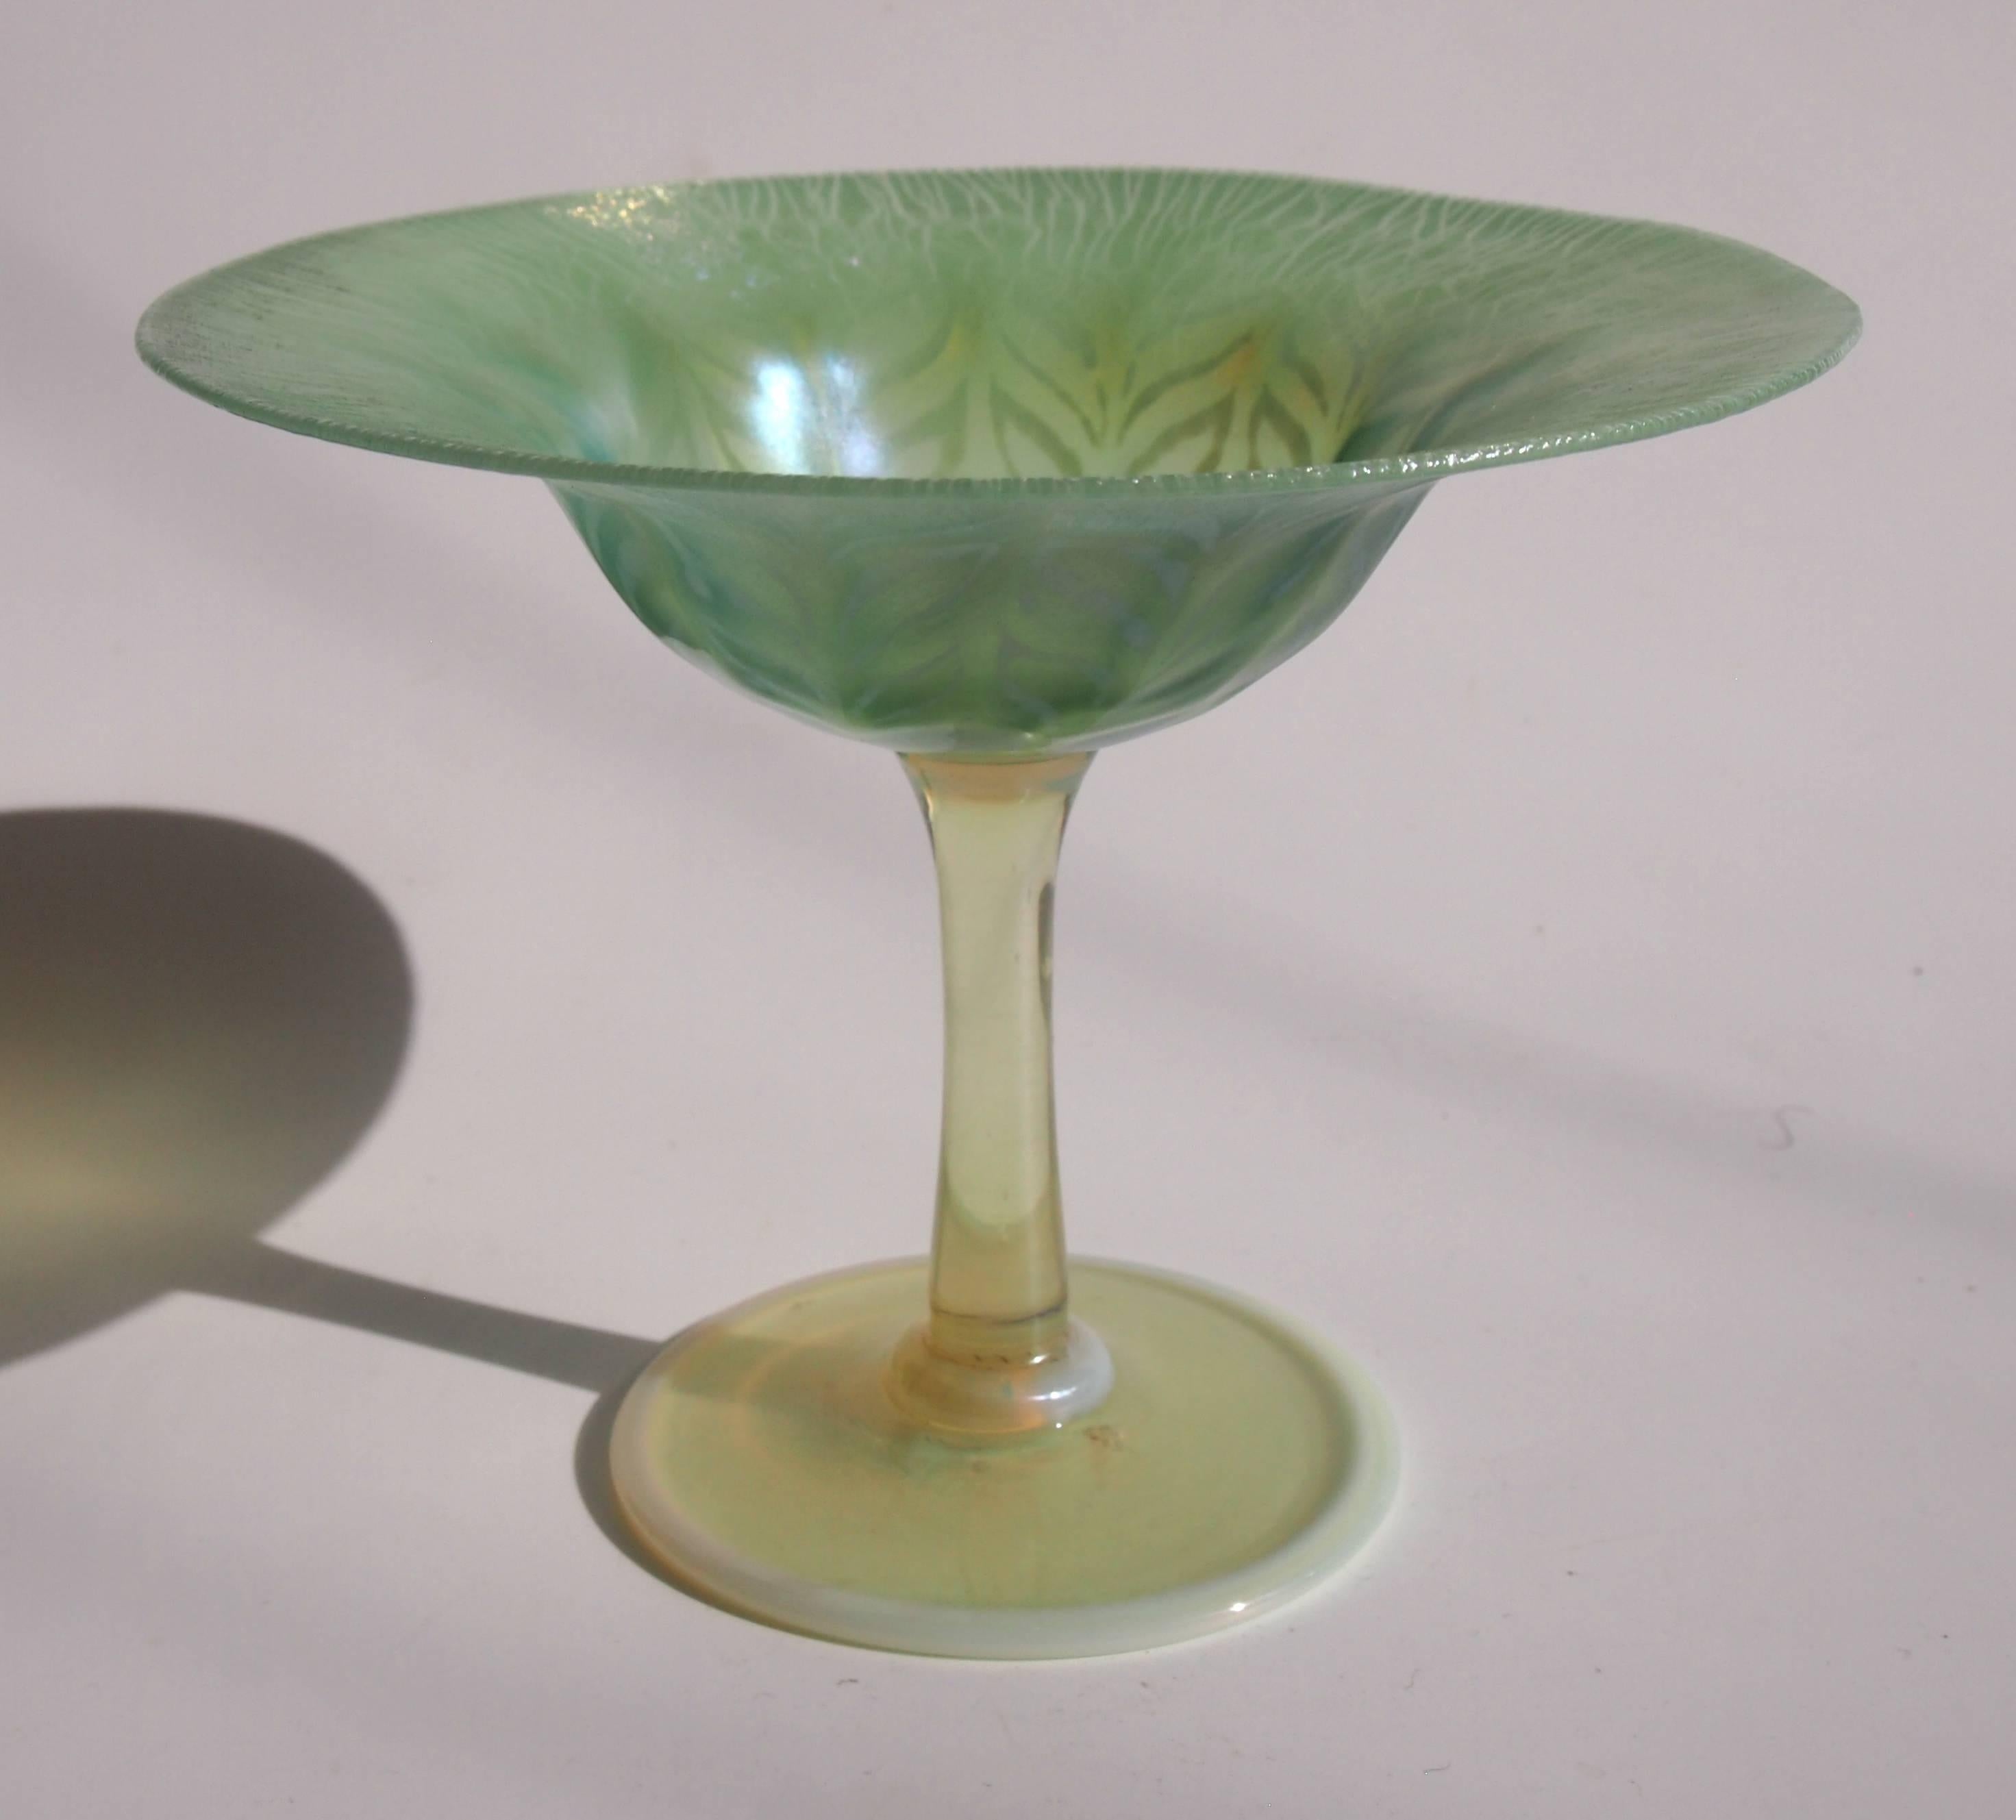 A superior Louis comfort Tiffany green and opal Pastel Favrile Compote/Tazza with an opal yellow stem and foot. Beautifully signed '1701' and 'L.C.Tiffany Favrile' -on the base. See picture 8. The green pastel has a slightly onion skinned effect to